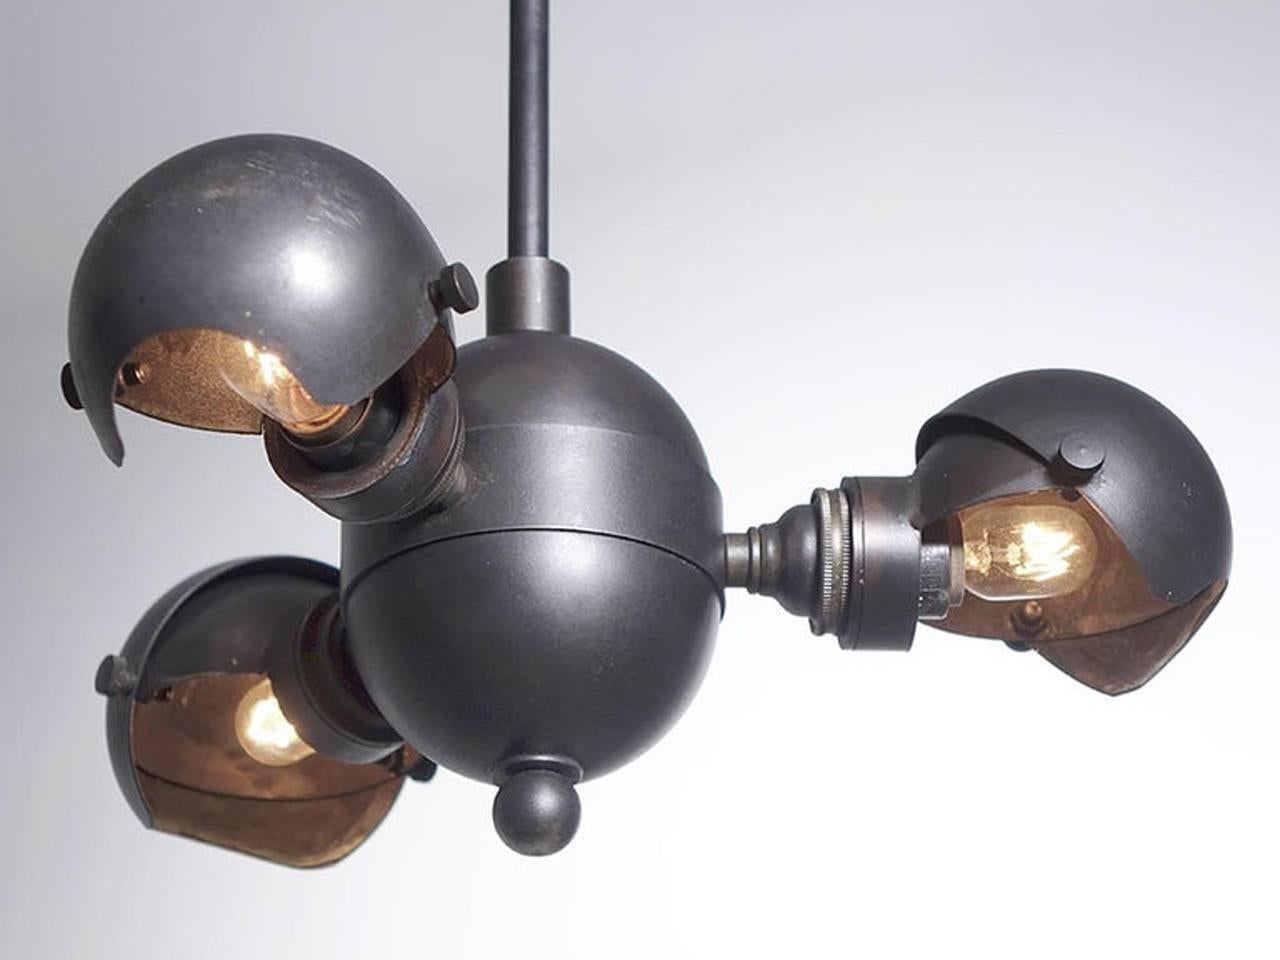 This all brass lamp is totally unique. It was inspired by August Haarstick in the Jugendstil Deco style. There is a centre ball that is the axis for three satellite hinged ball shades. Each hood works as an aperture that pivots to control the amount